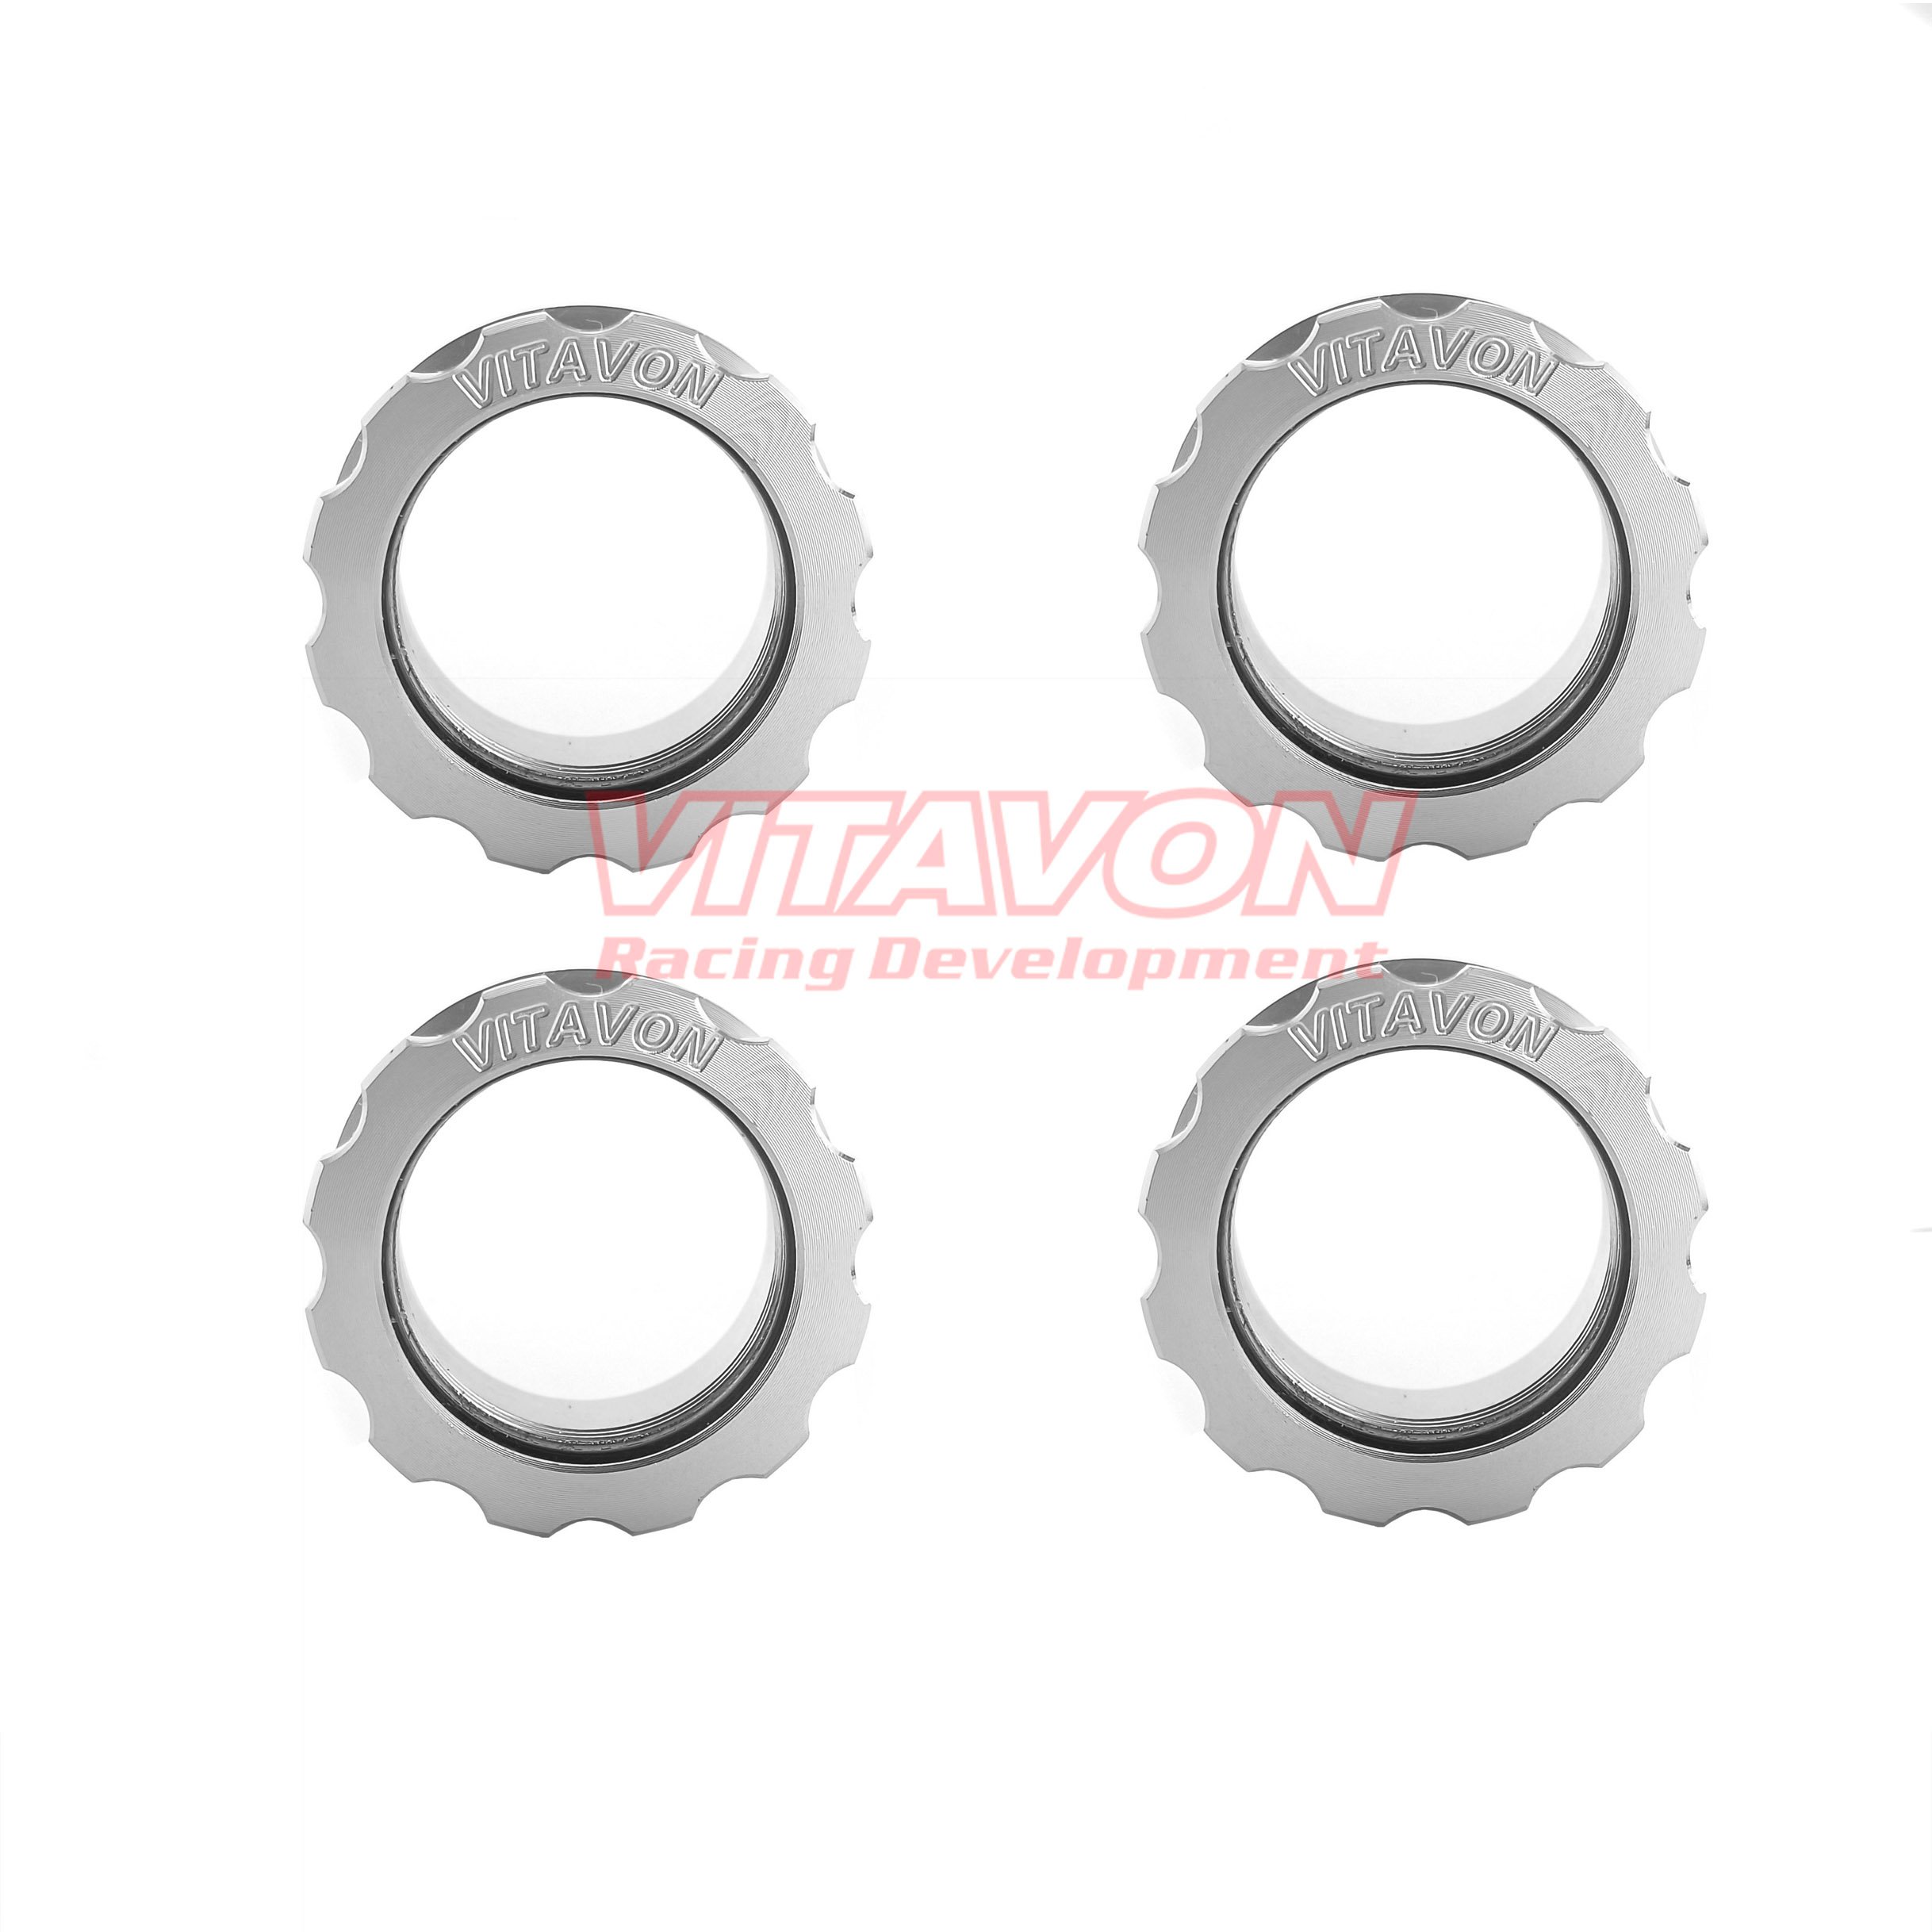 VITAVON CNC Alu7075 Shock Collar Spacer 10mm Extended For Arrma Kraton 8S Outcast 8s